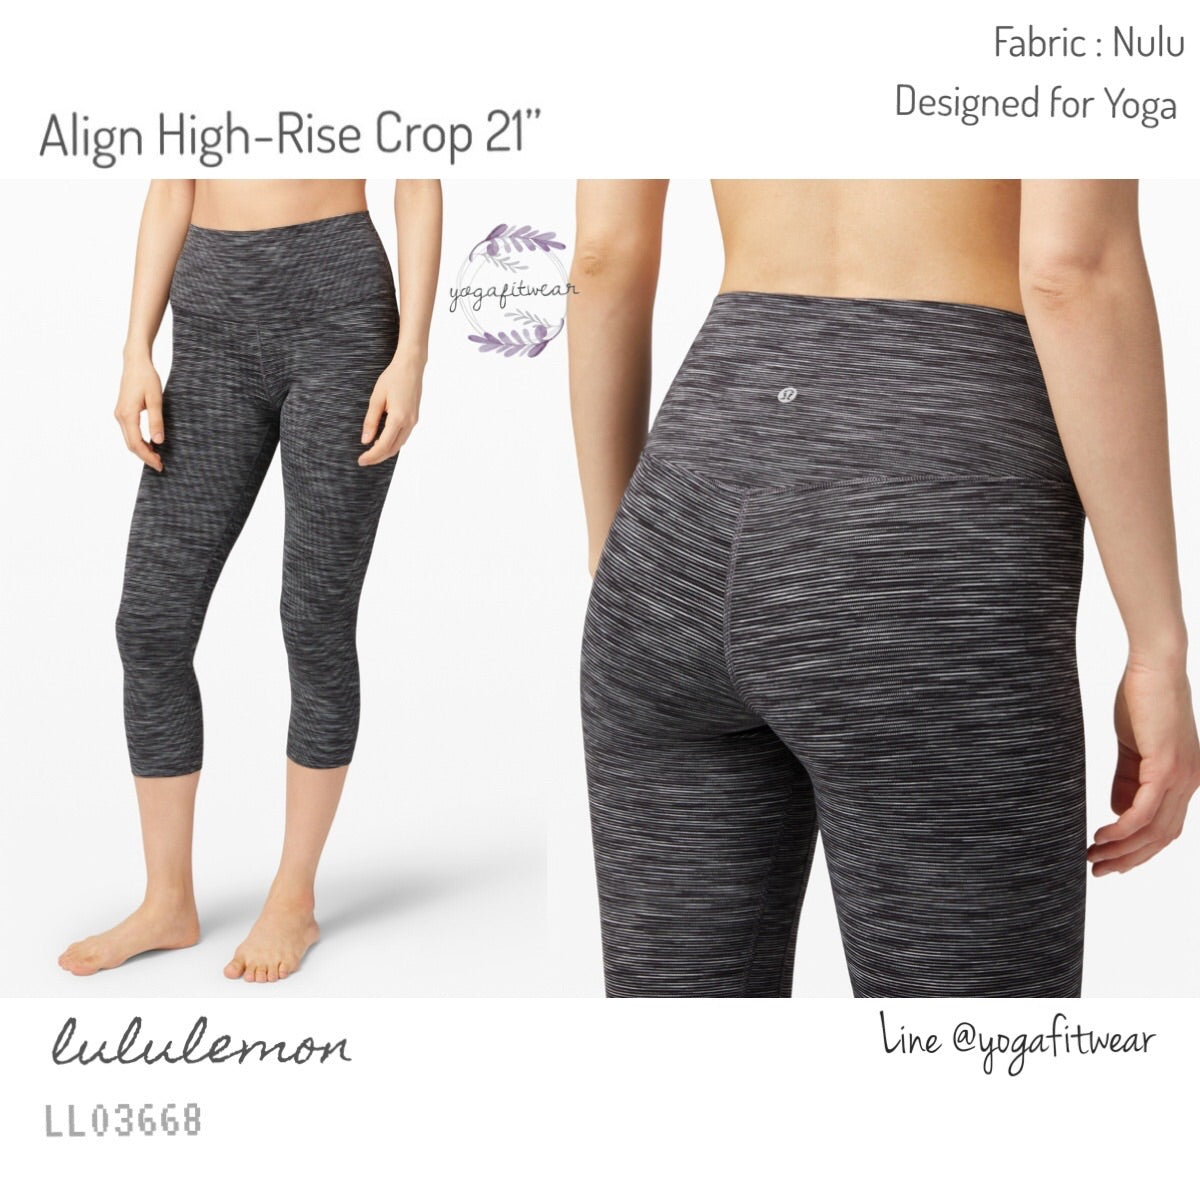 Lululemon : Align High-Rise Crop 21” (wee are from space dark carbon ice grey) (LL03668)